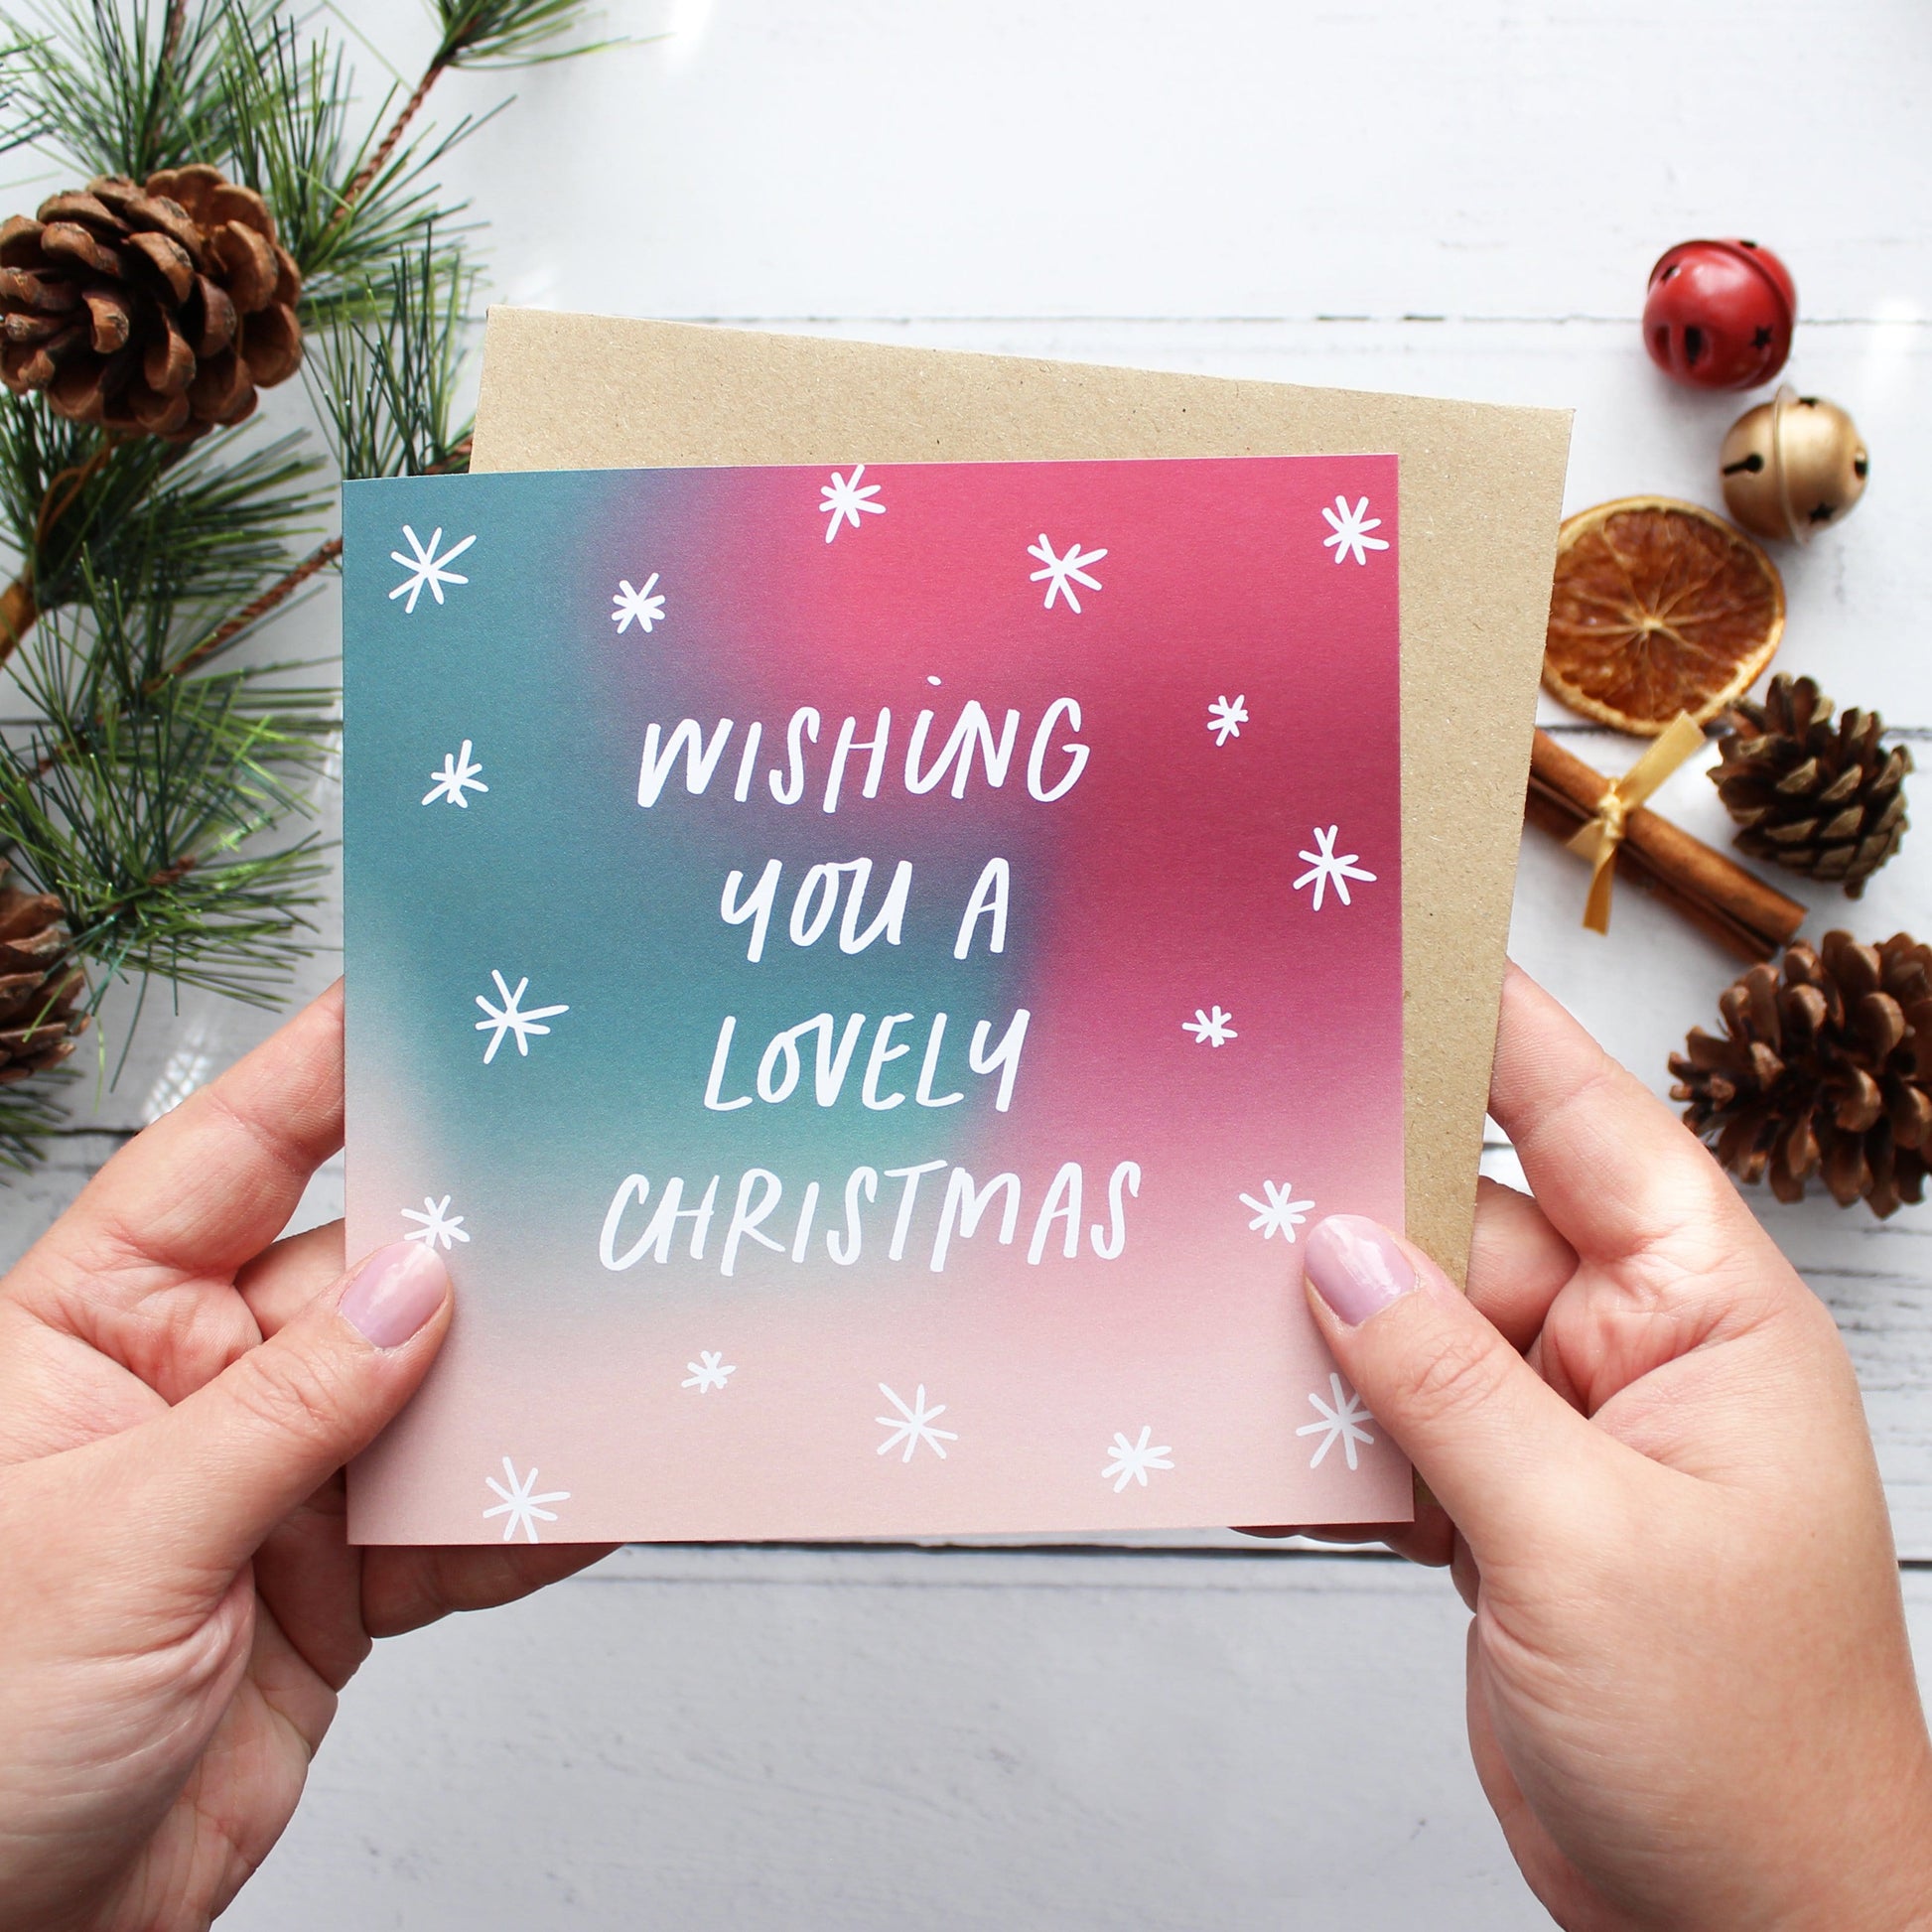 Wishing you a lovely Christmas card from Purple Tree Designs